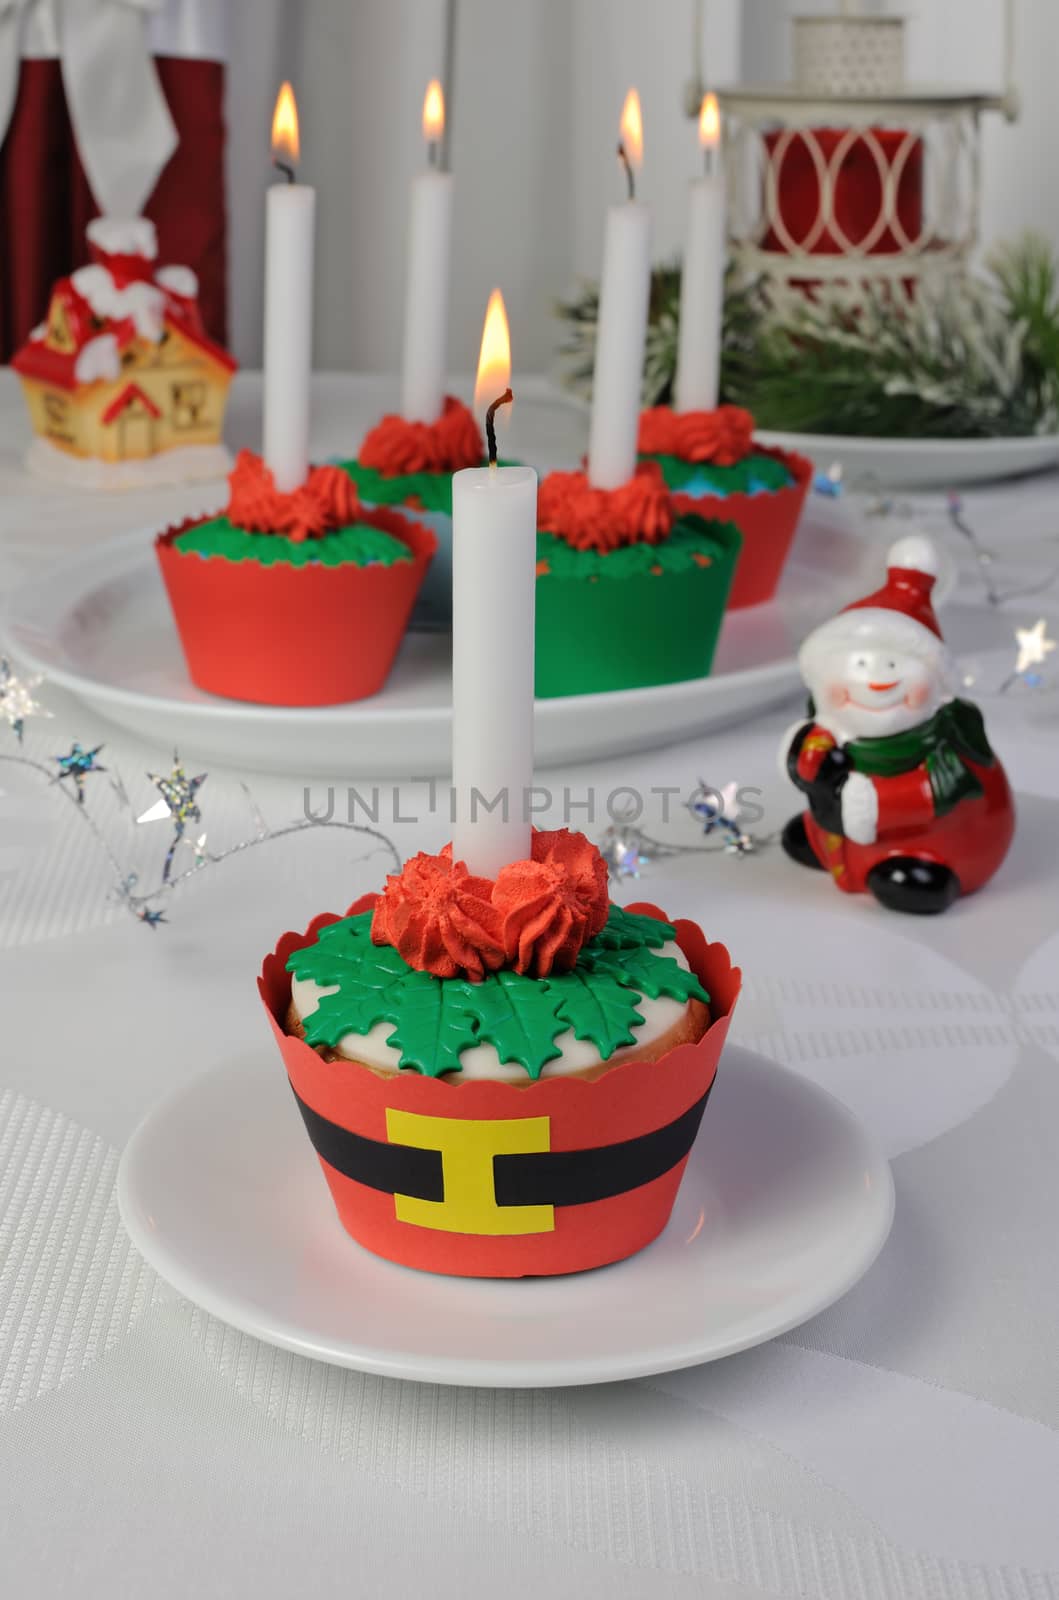 Muffins in the form of a Christmas flower by Apolonia